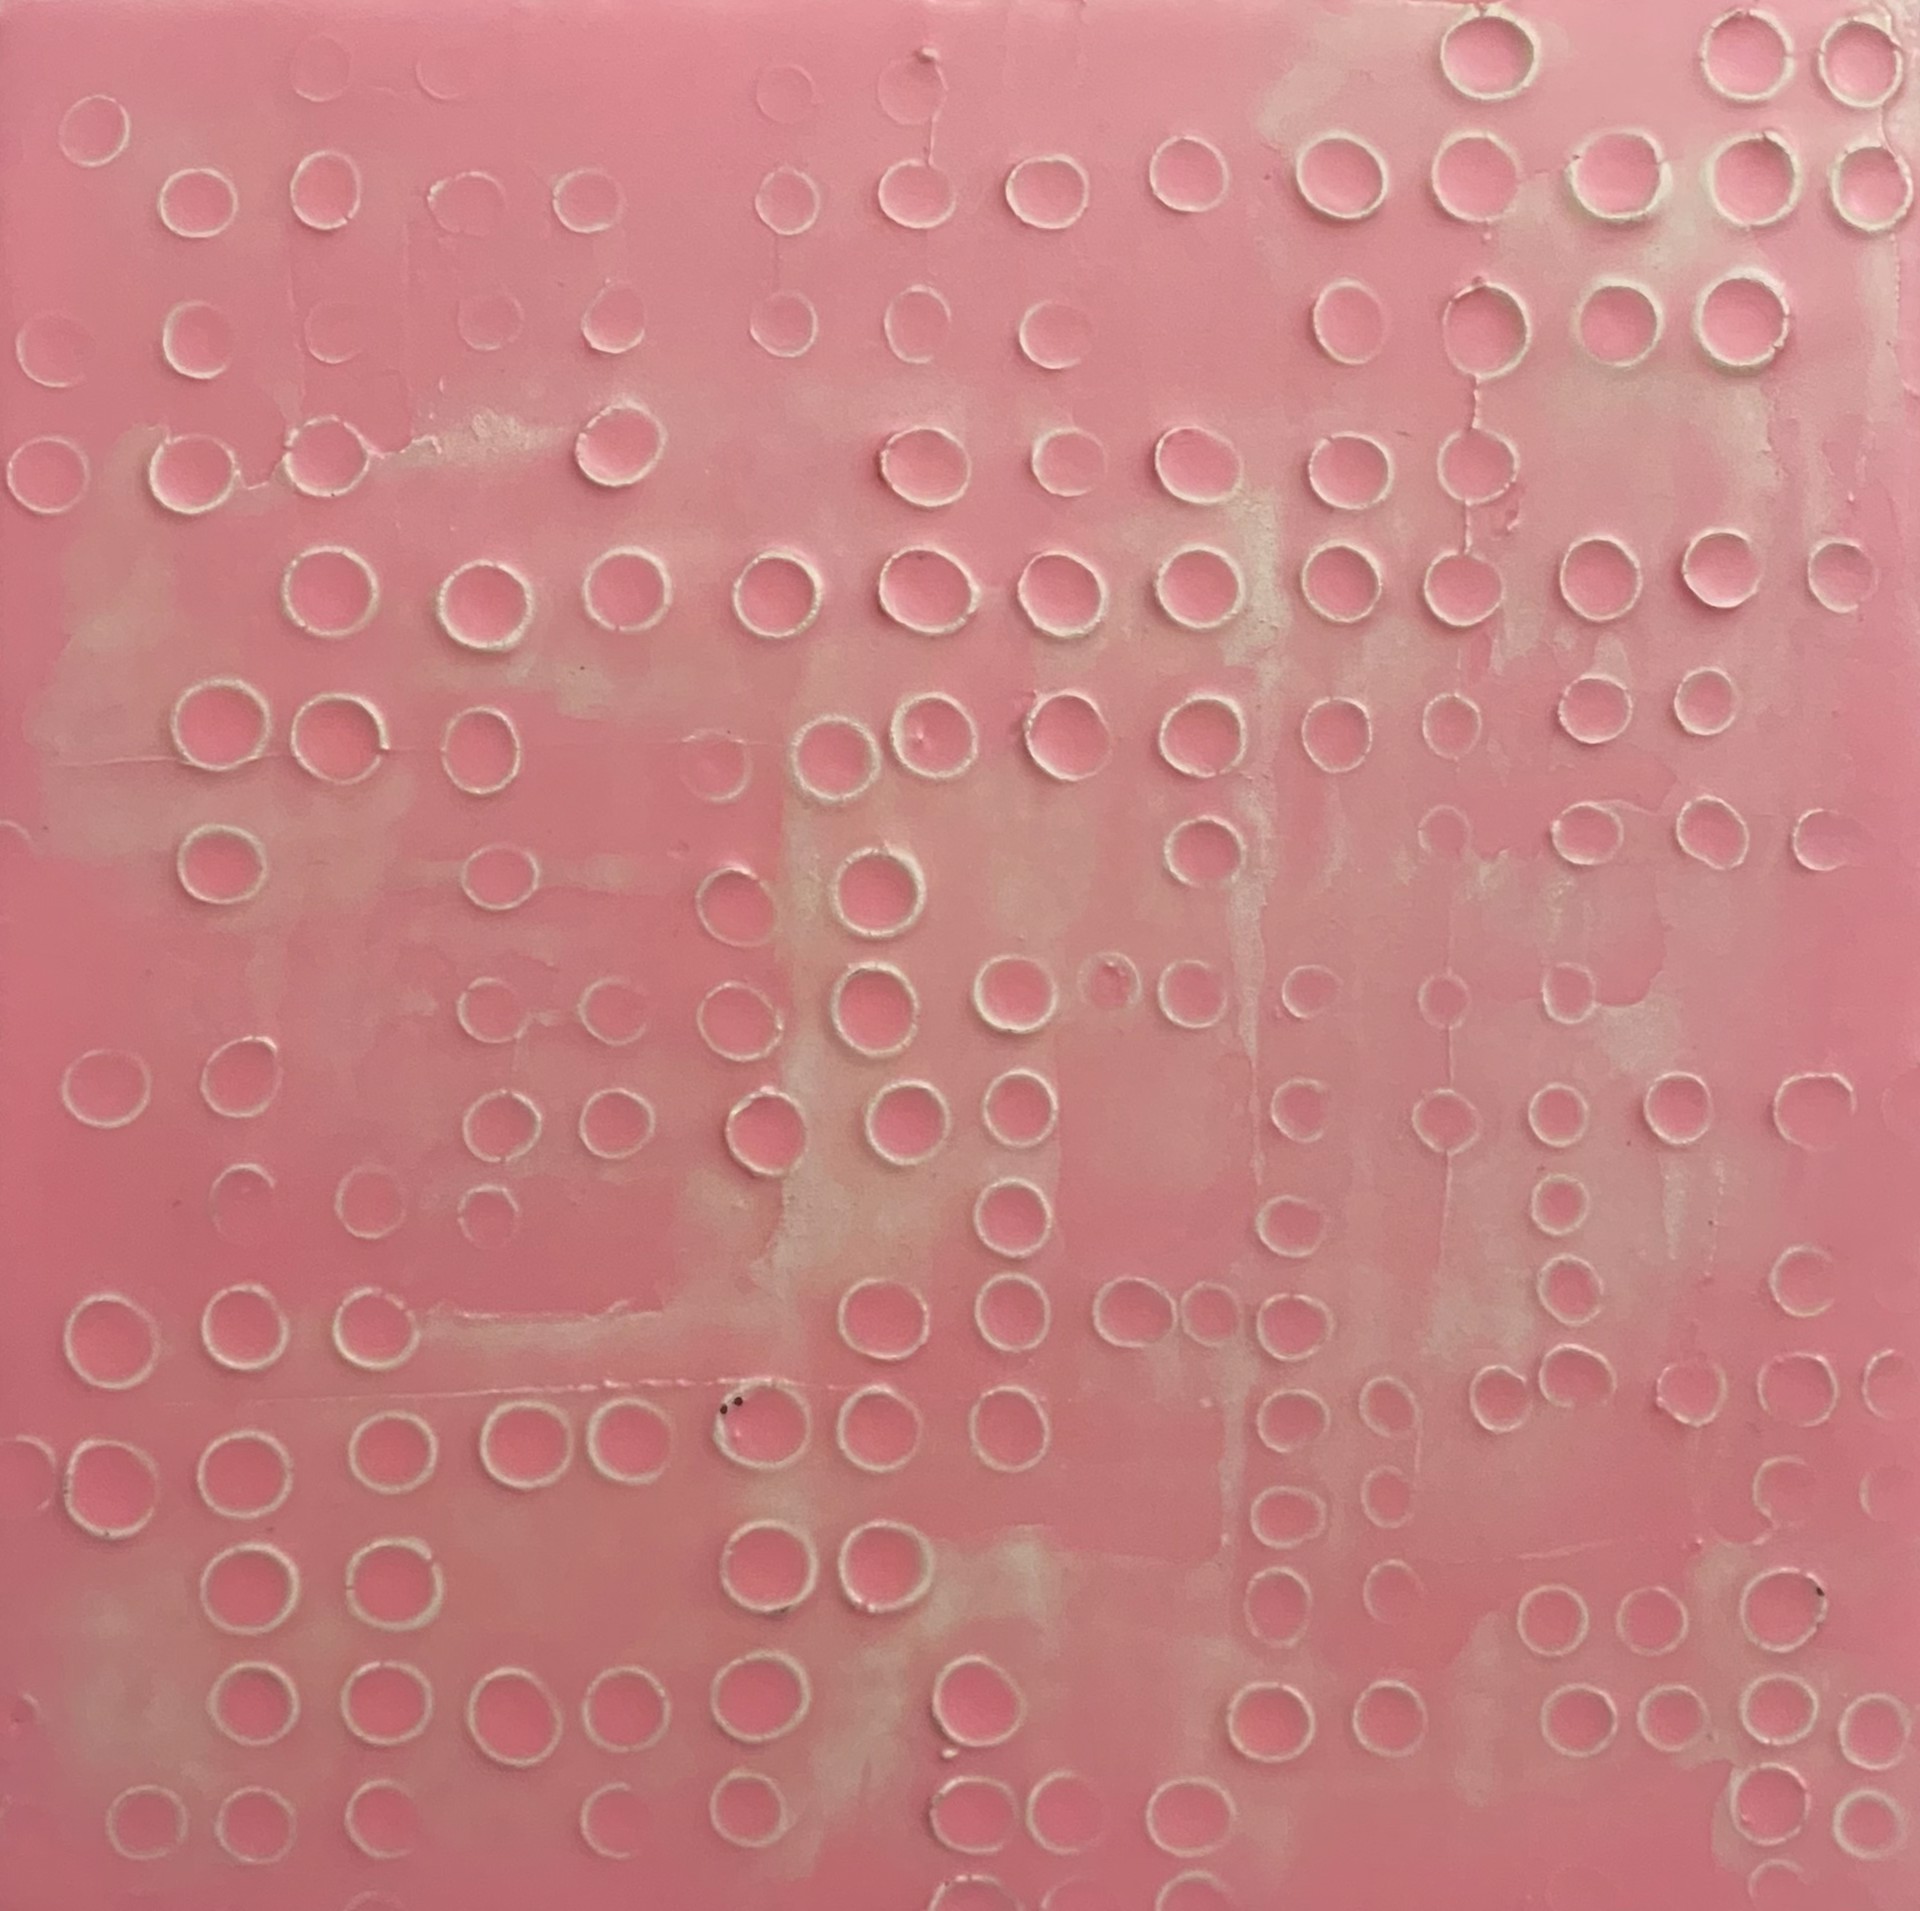 Just Pretty Pink Circles To Make You Smile by Scott Connelly